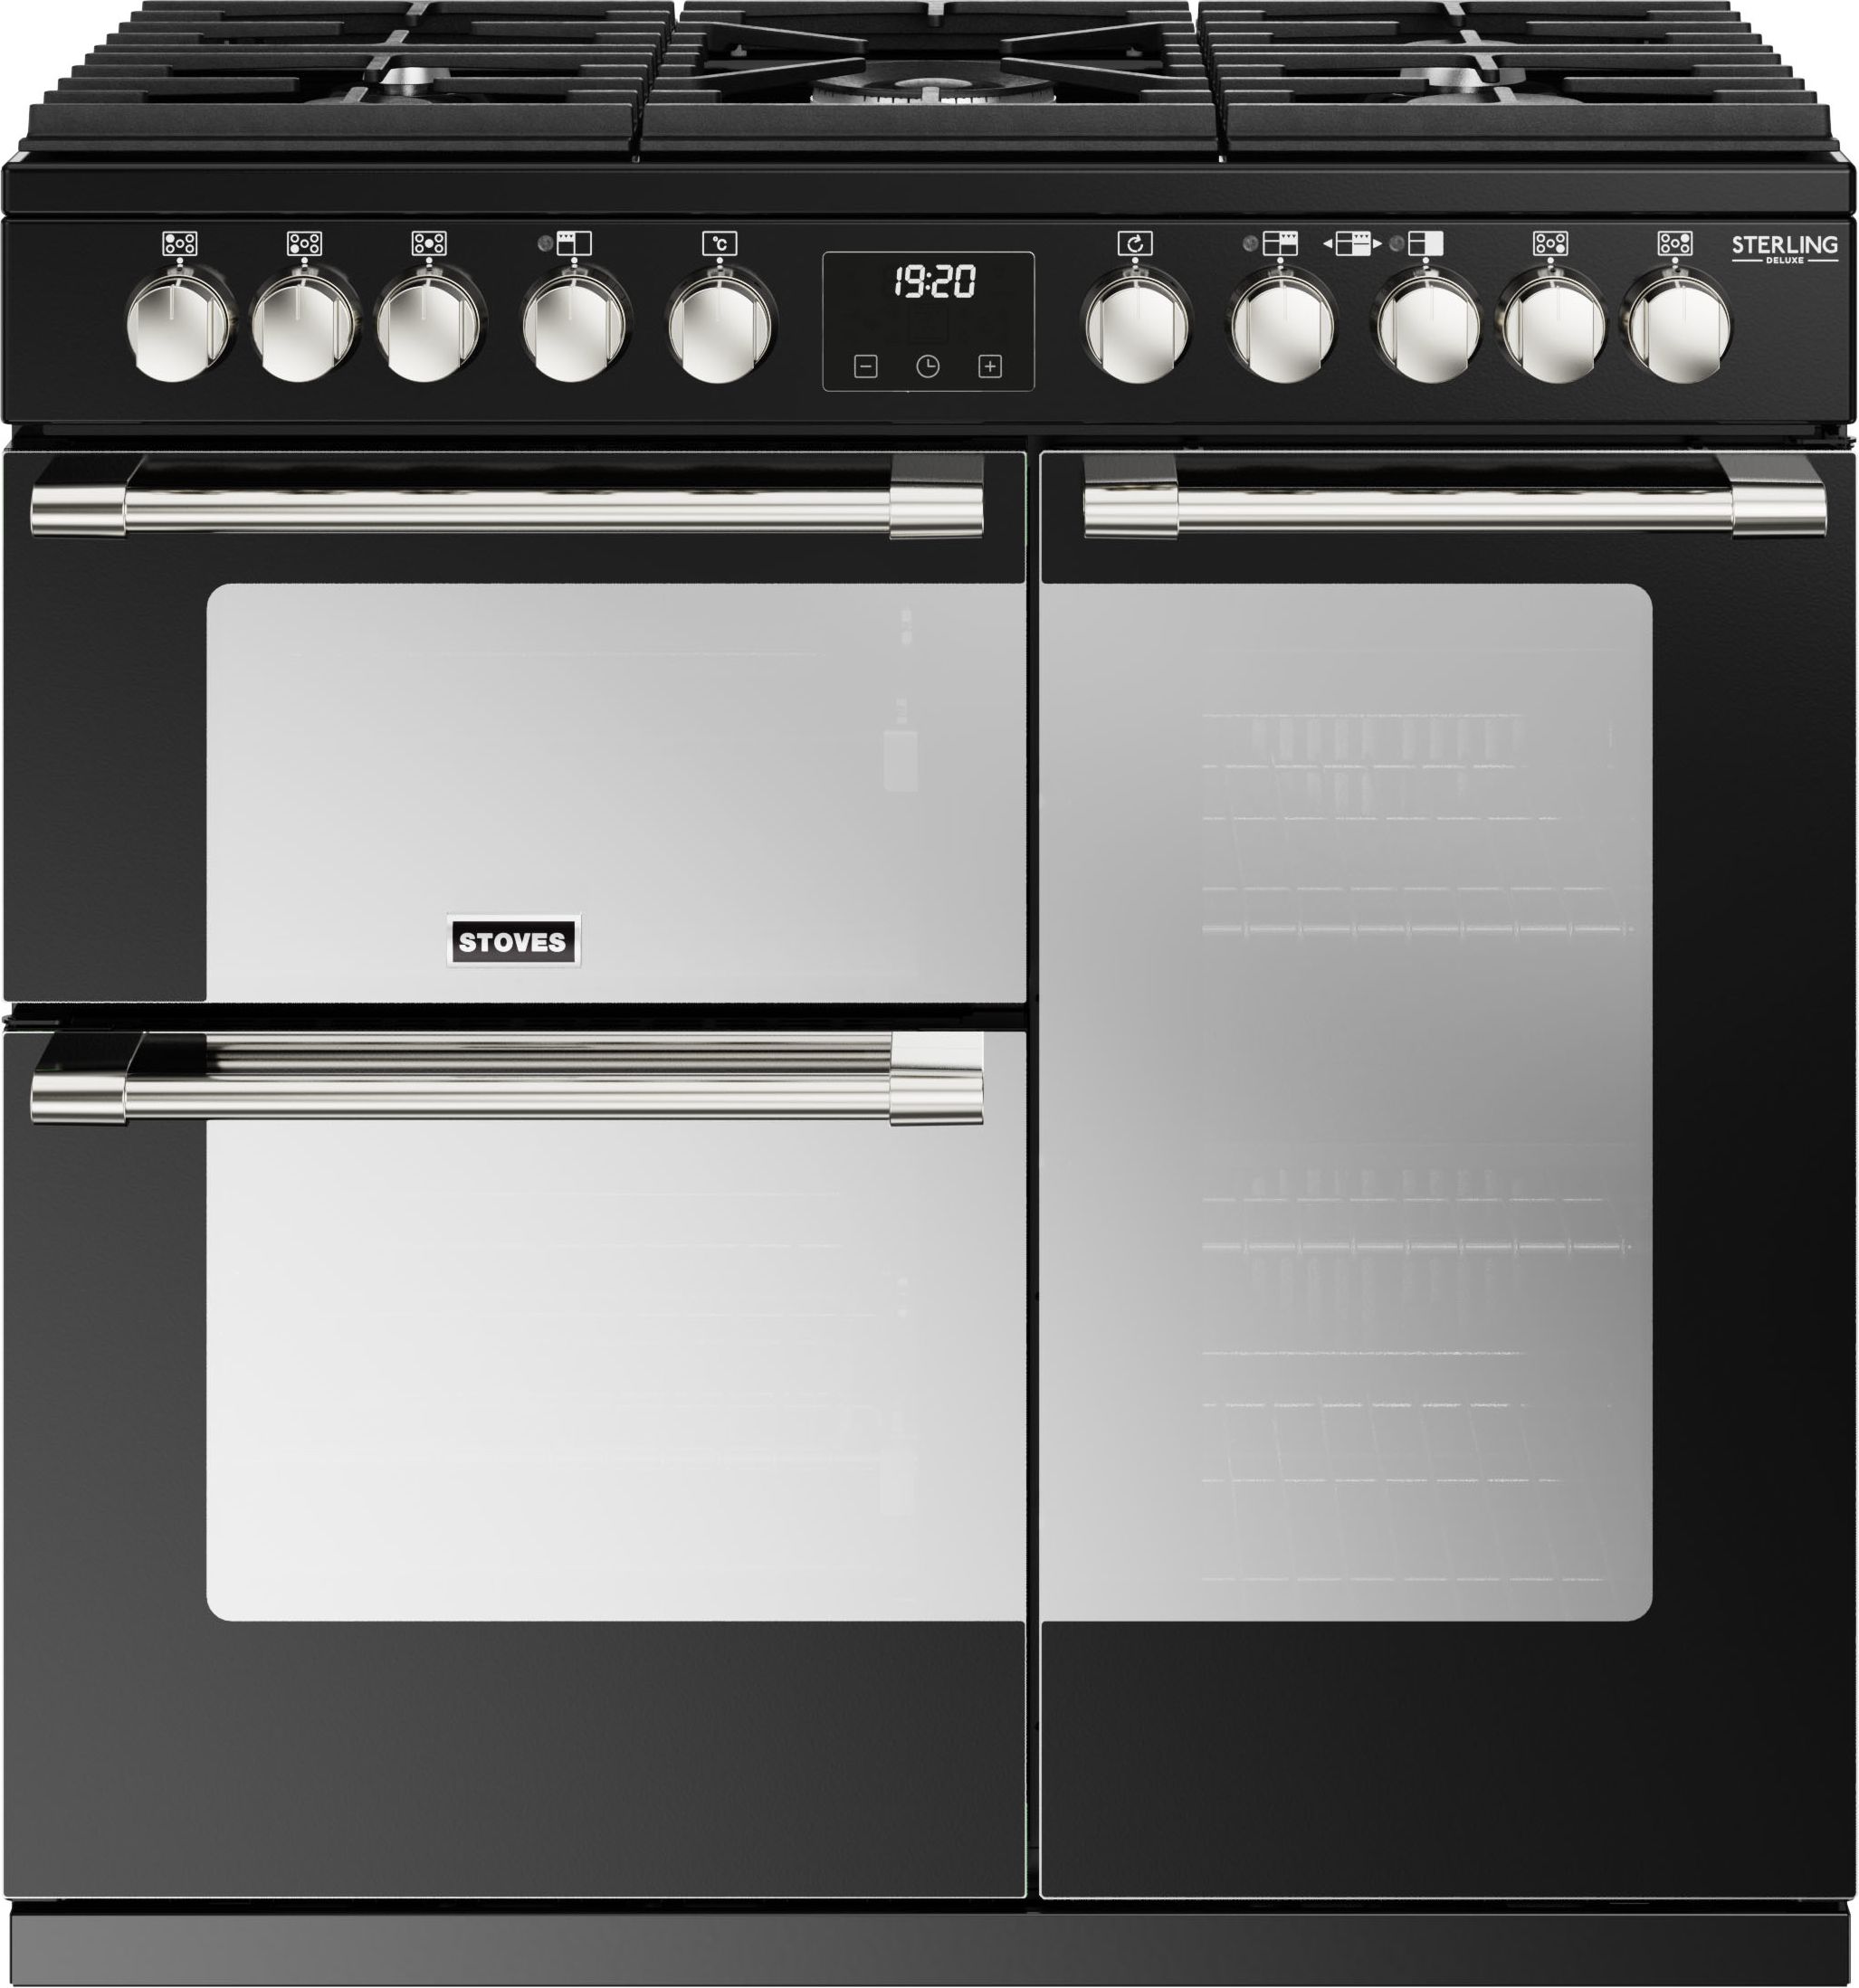 Stoves Sterling Deluxe ST DX STER D900DF BK 90cm Dual Fuel Range Cooker - Black - A/A/A Rated, Black